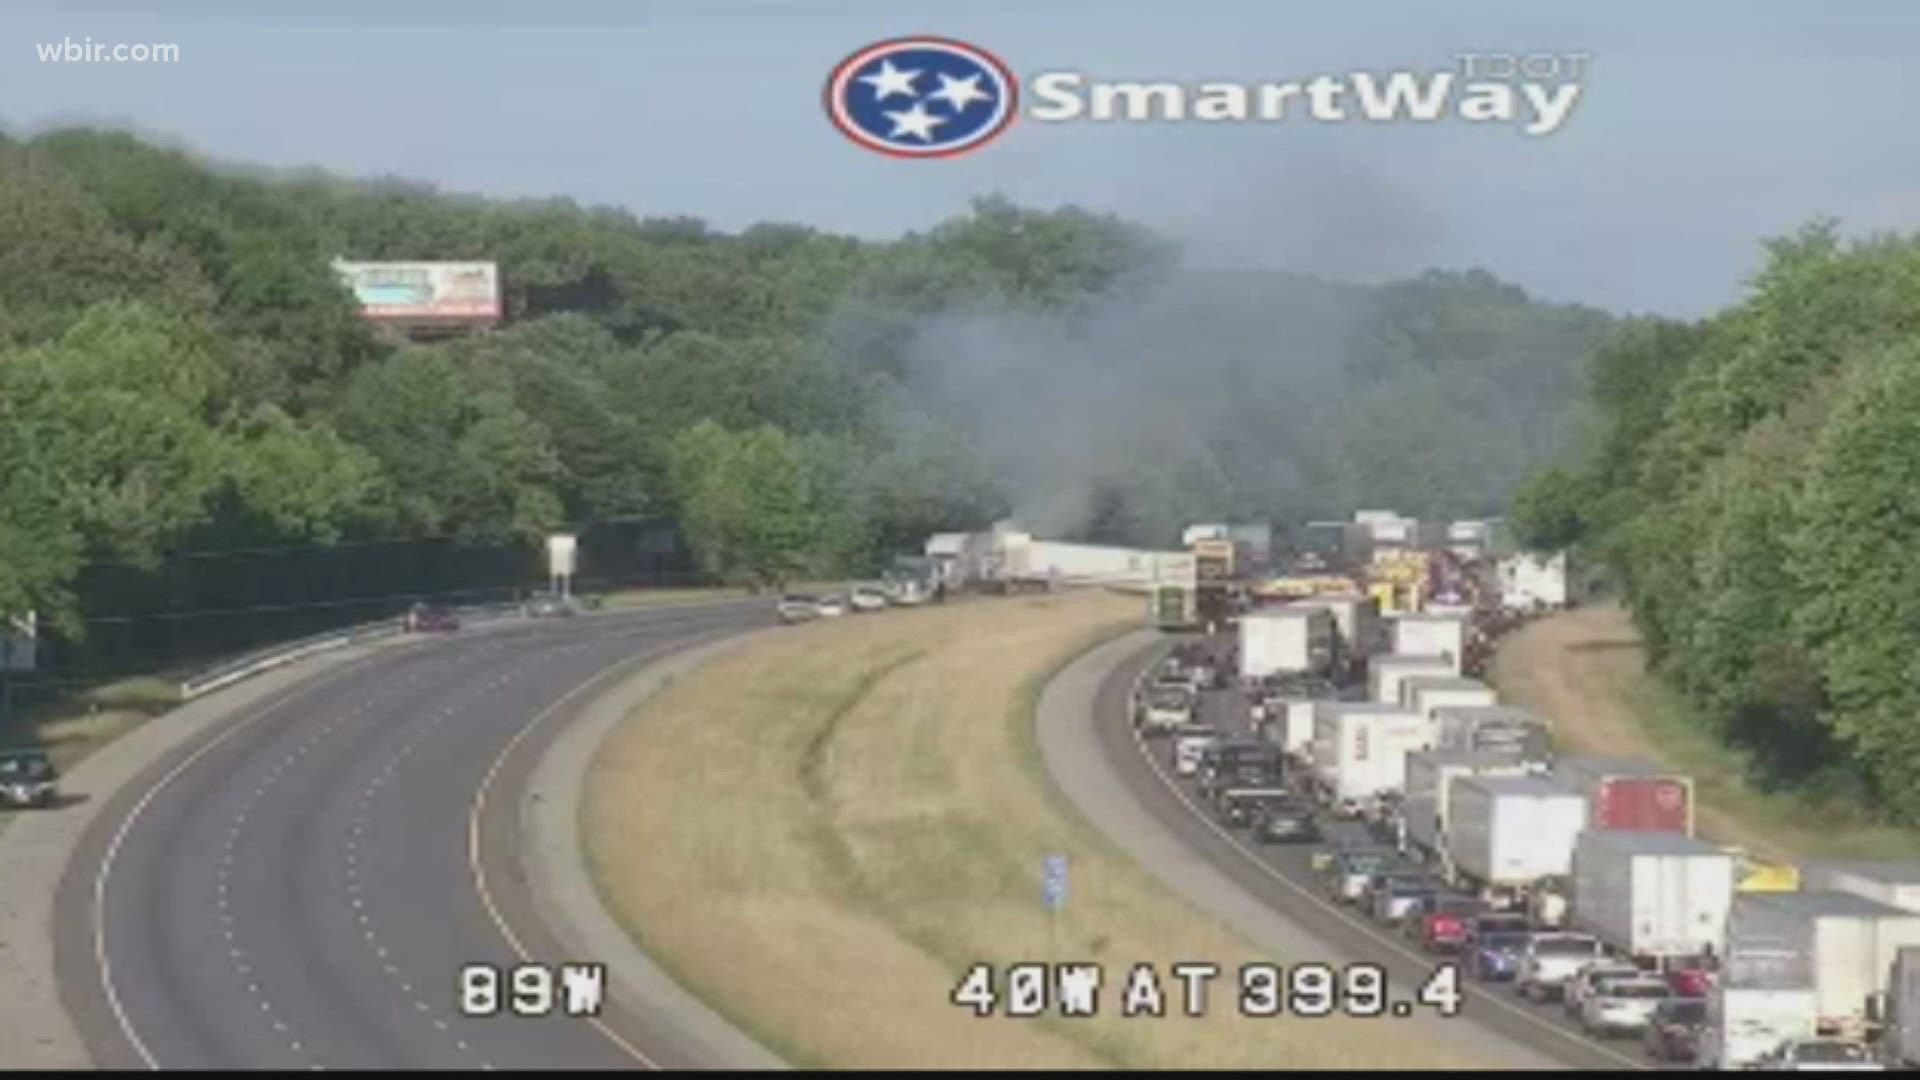 A severe multi-vehicle crash has closed most of a major highway in East Tennessee, I-40.